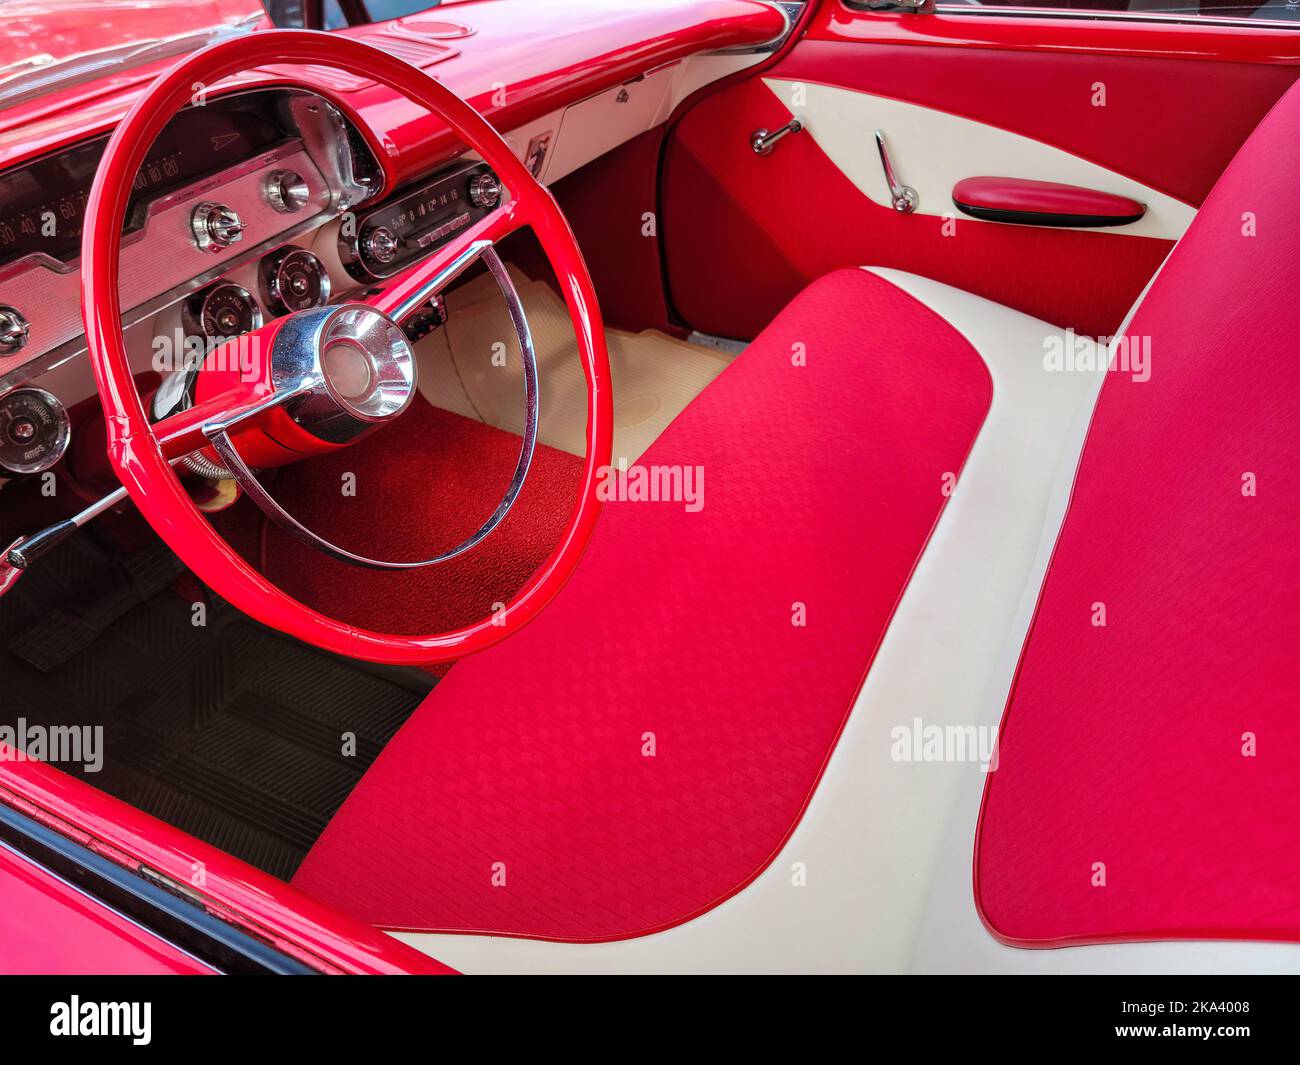 Bright red and white vintage car interior with bench seat and steering wheel Stock Photo